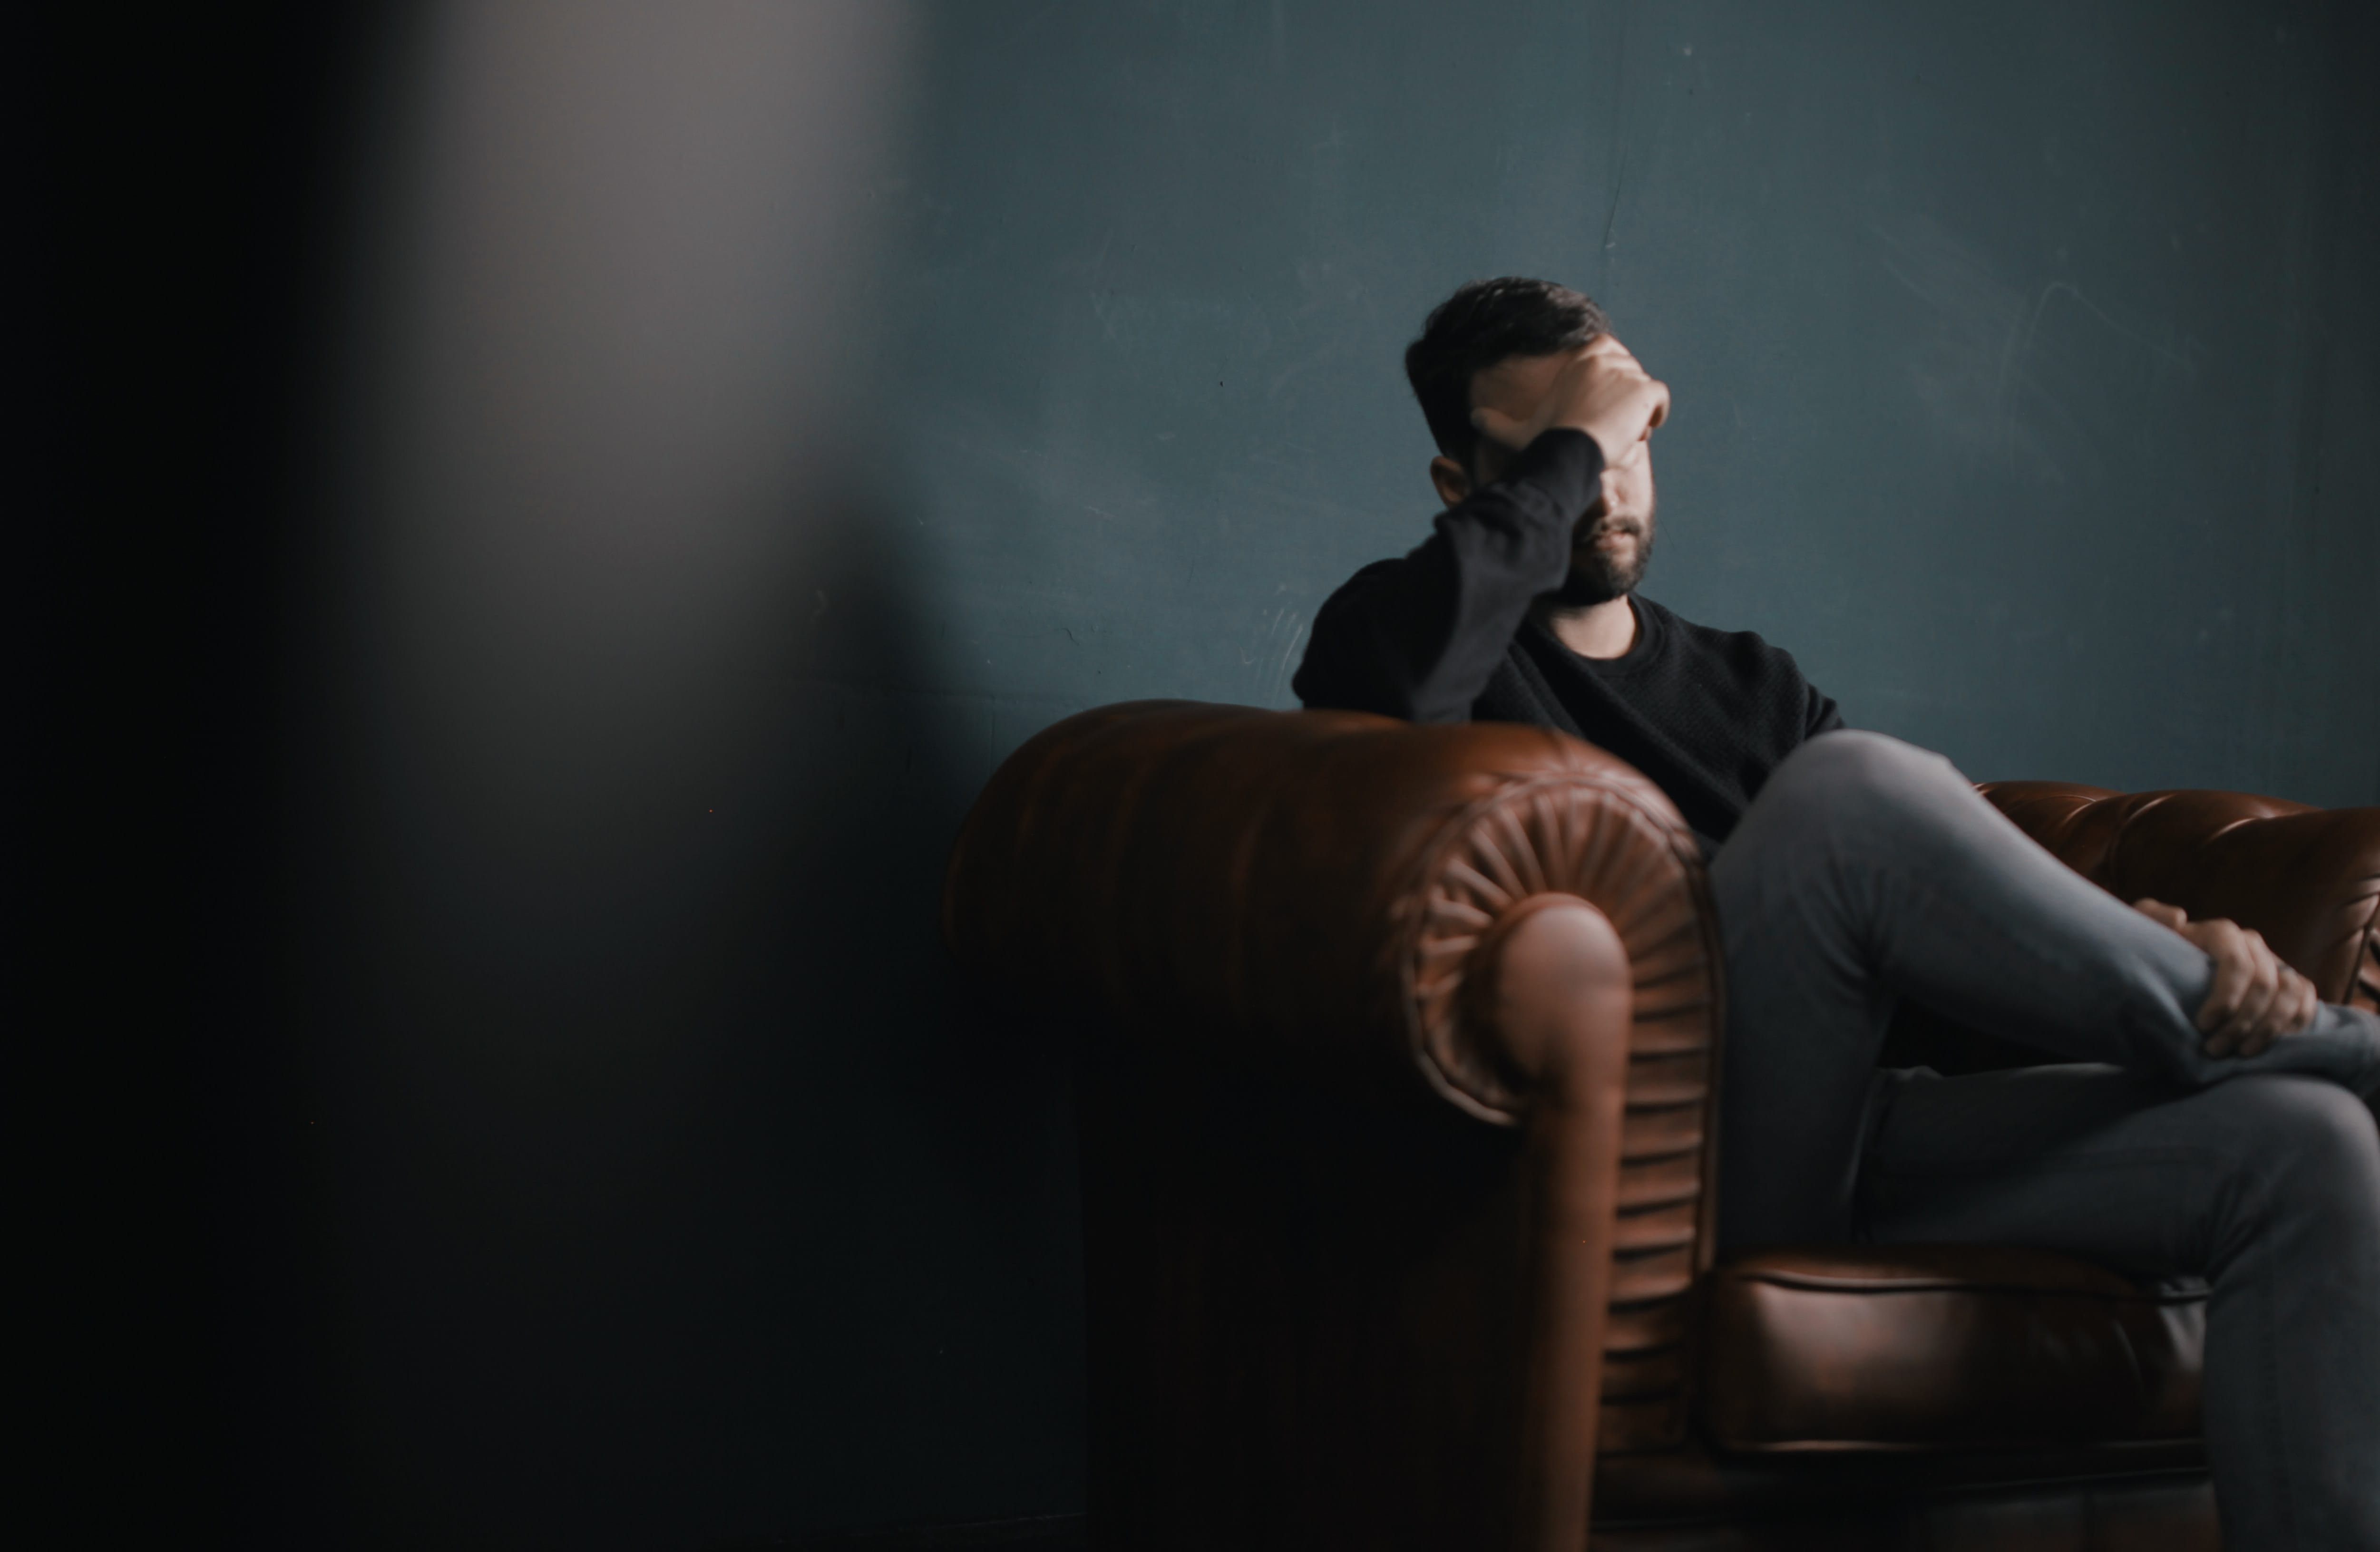 Man sitting on brown leather sofa covering his eyes with one hand; image by Nik Shuliahin, via Unsplash.com.